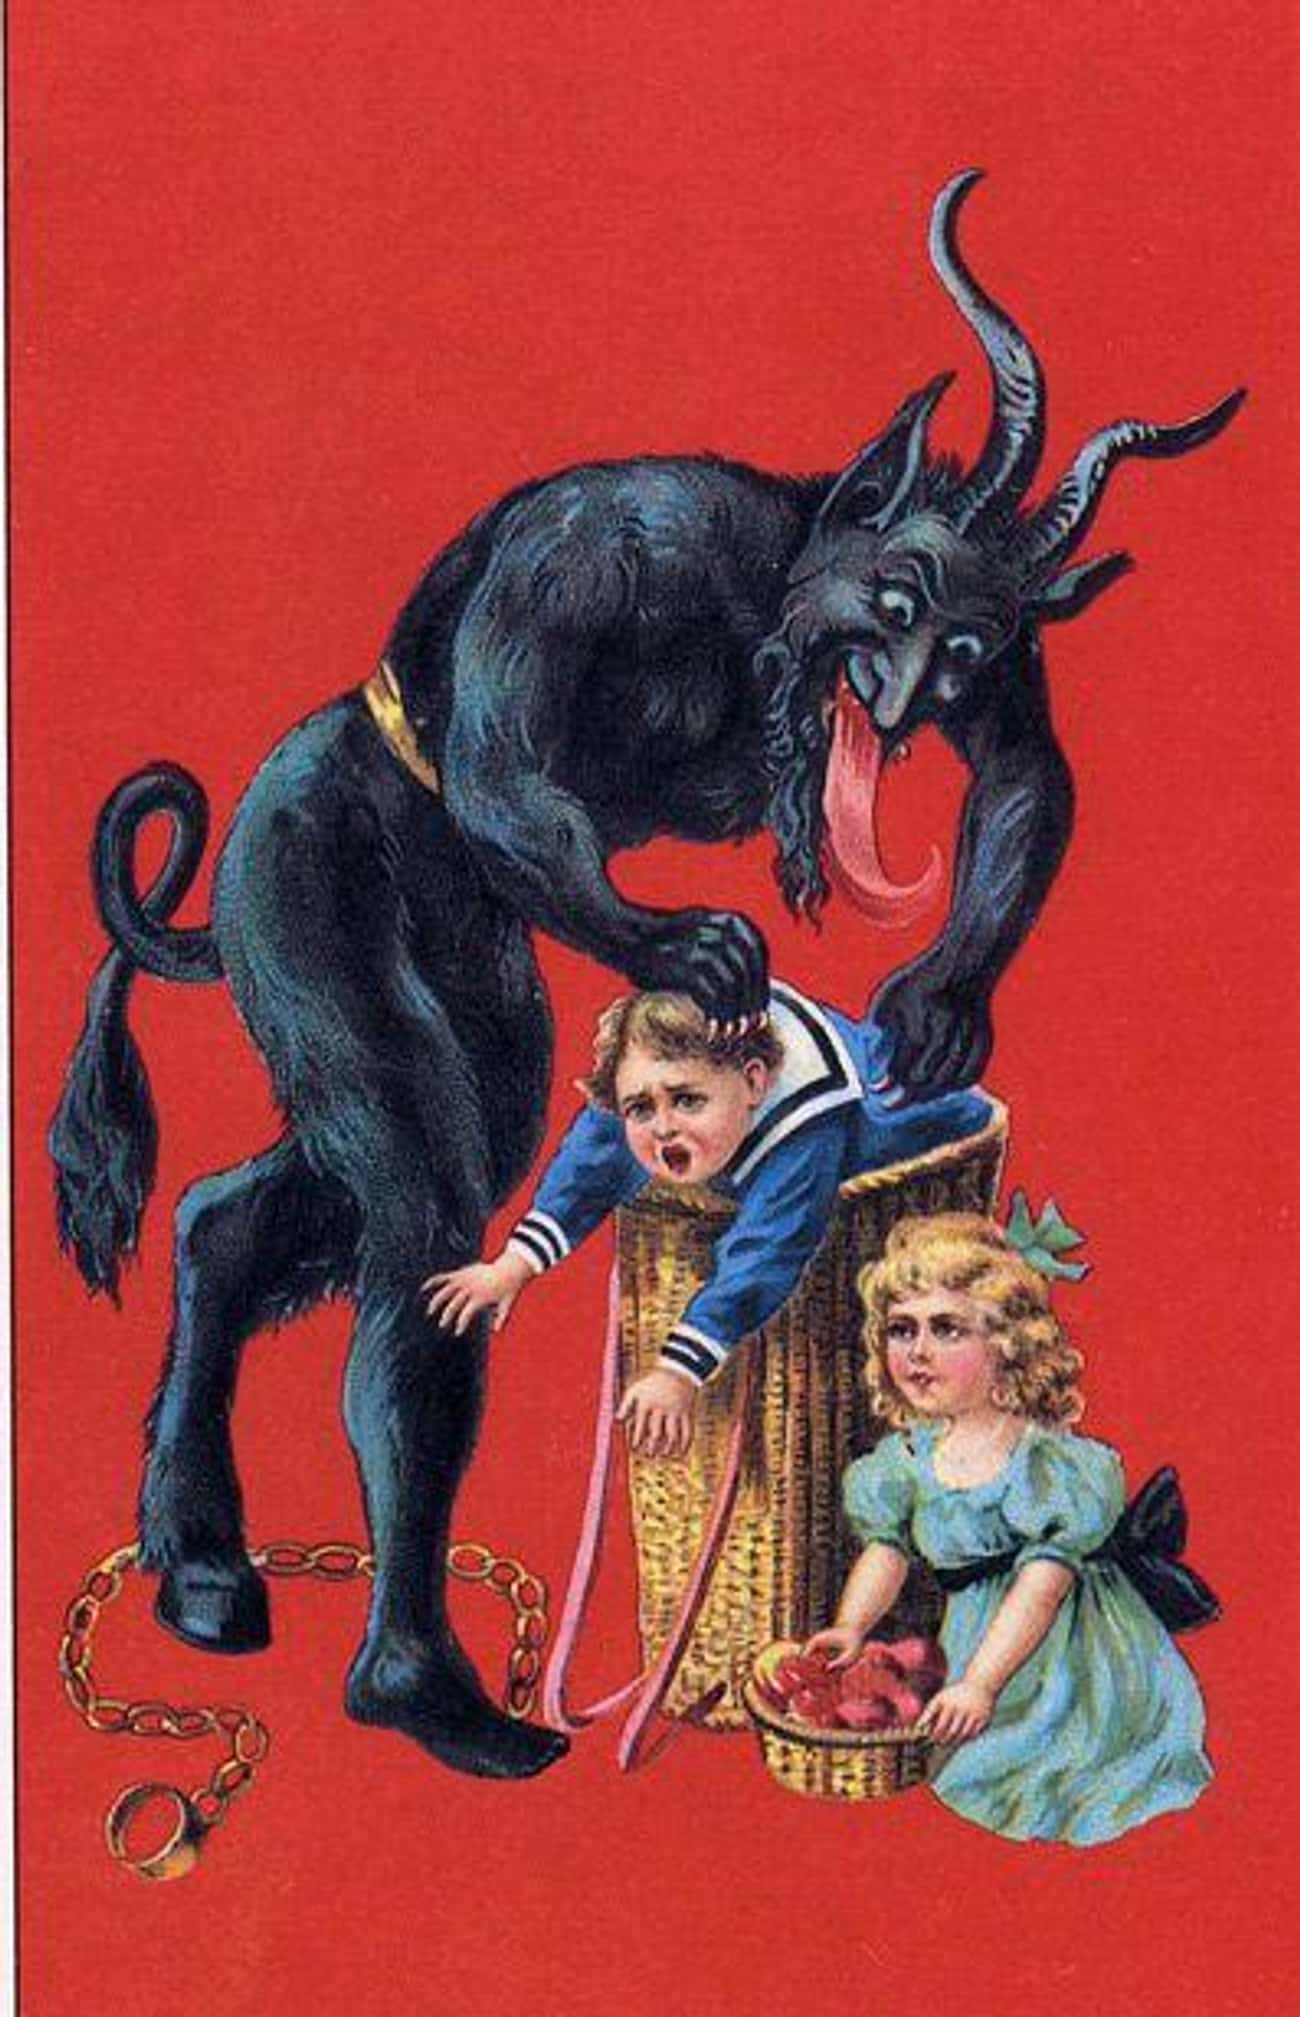 Krampus Stuffs Children In His Sack To Drag Them Back To Hell